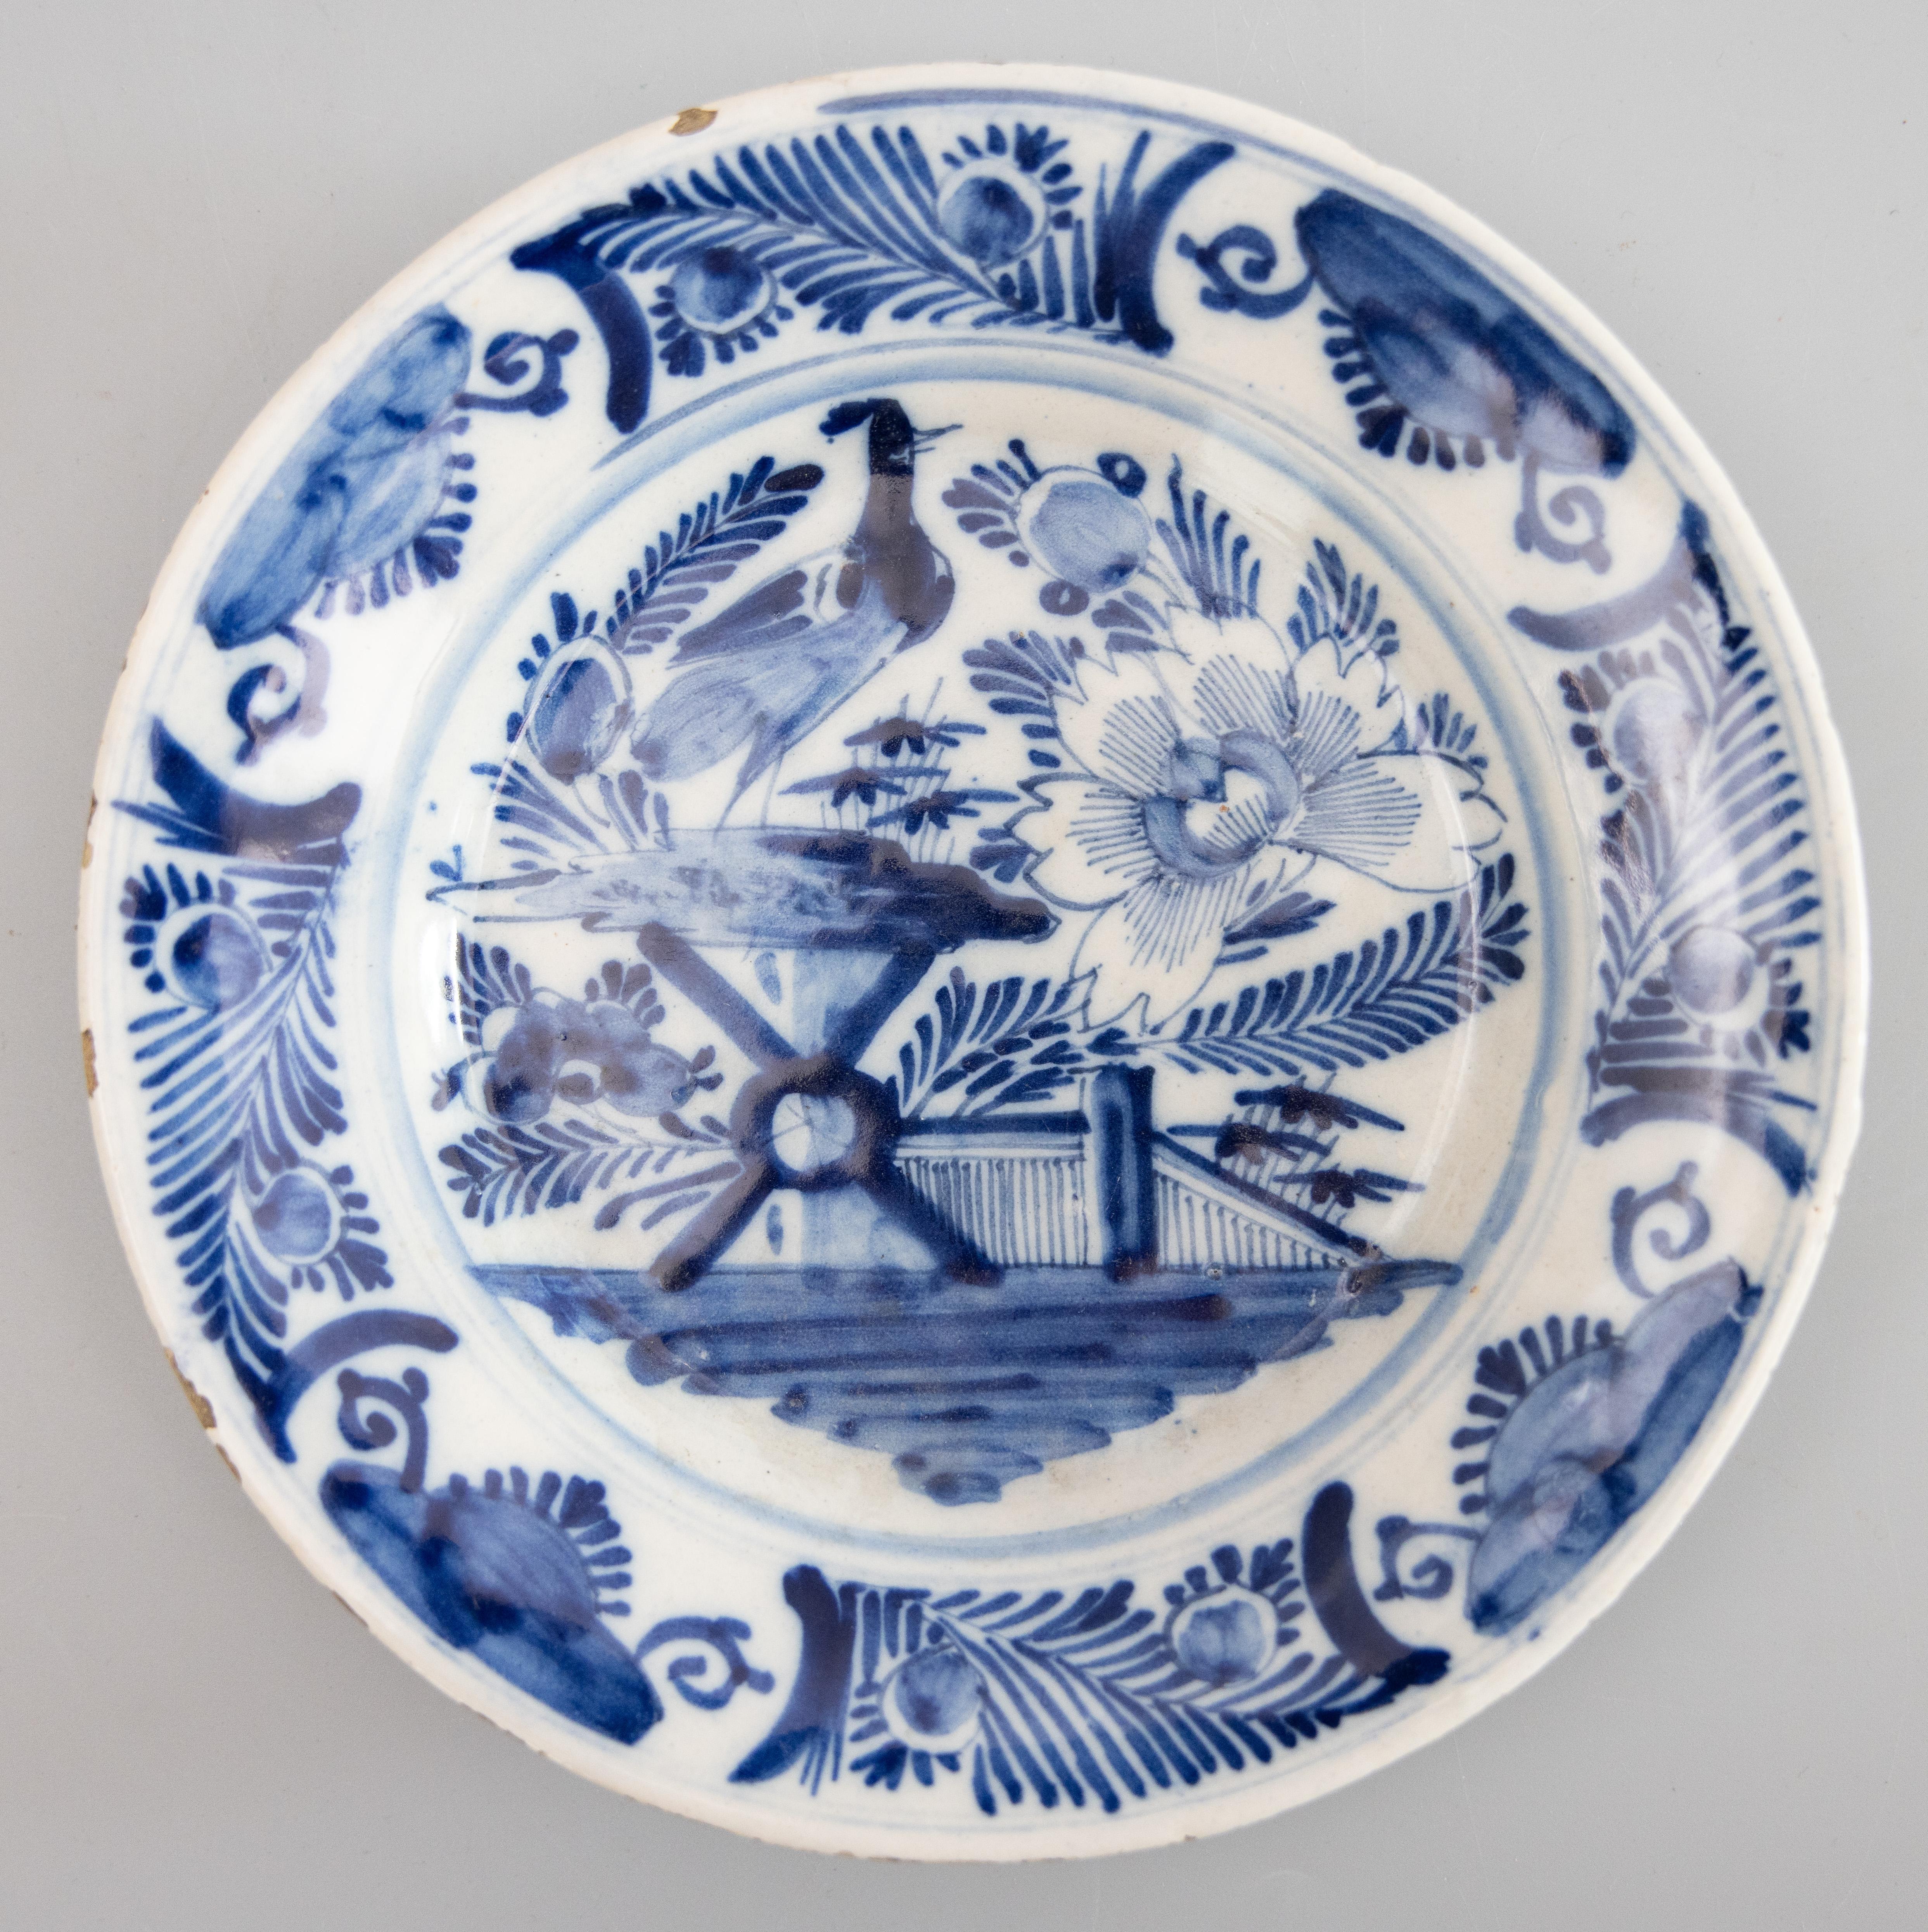 A superb pair of antique 18th-Century Dutch Delft Chinoiserie faience flower garden plates. These lovely plates have hand painted flowers, fence, birds, fruit and foliate border in cobalt blue and white. They would be wonderful displayed on a wall